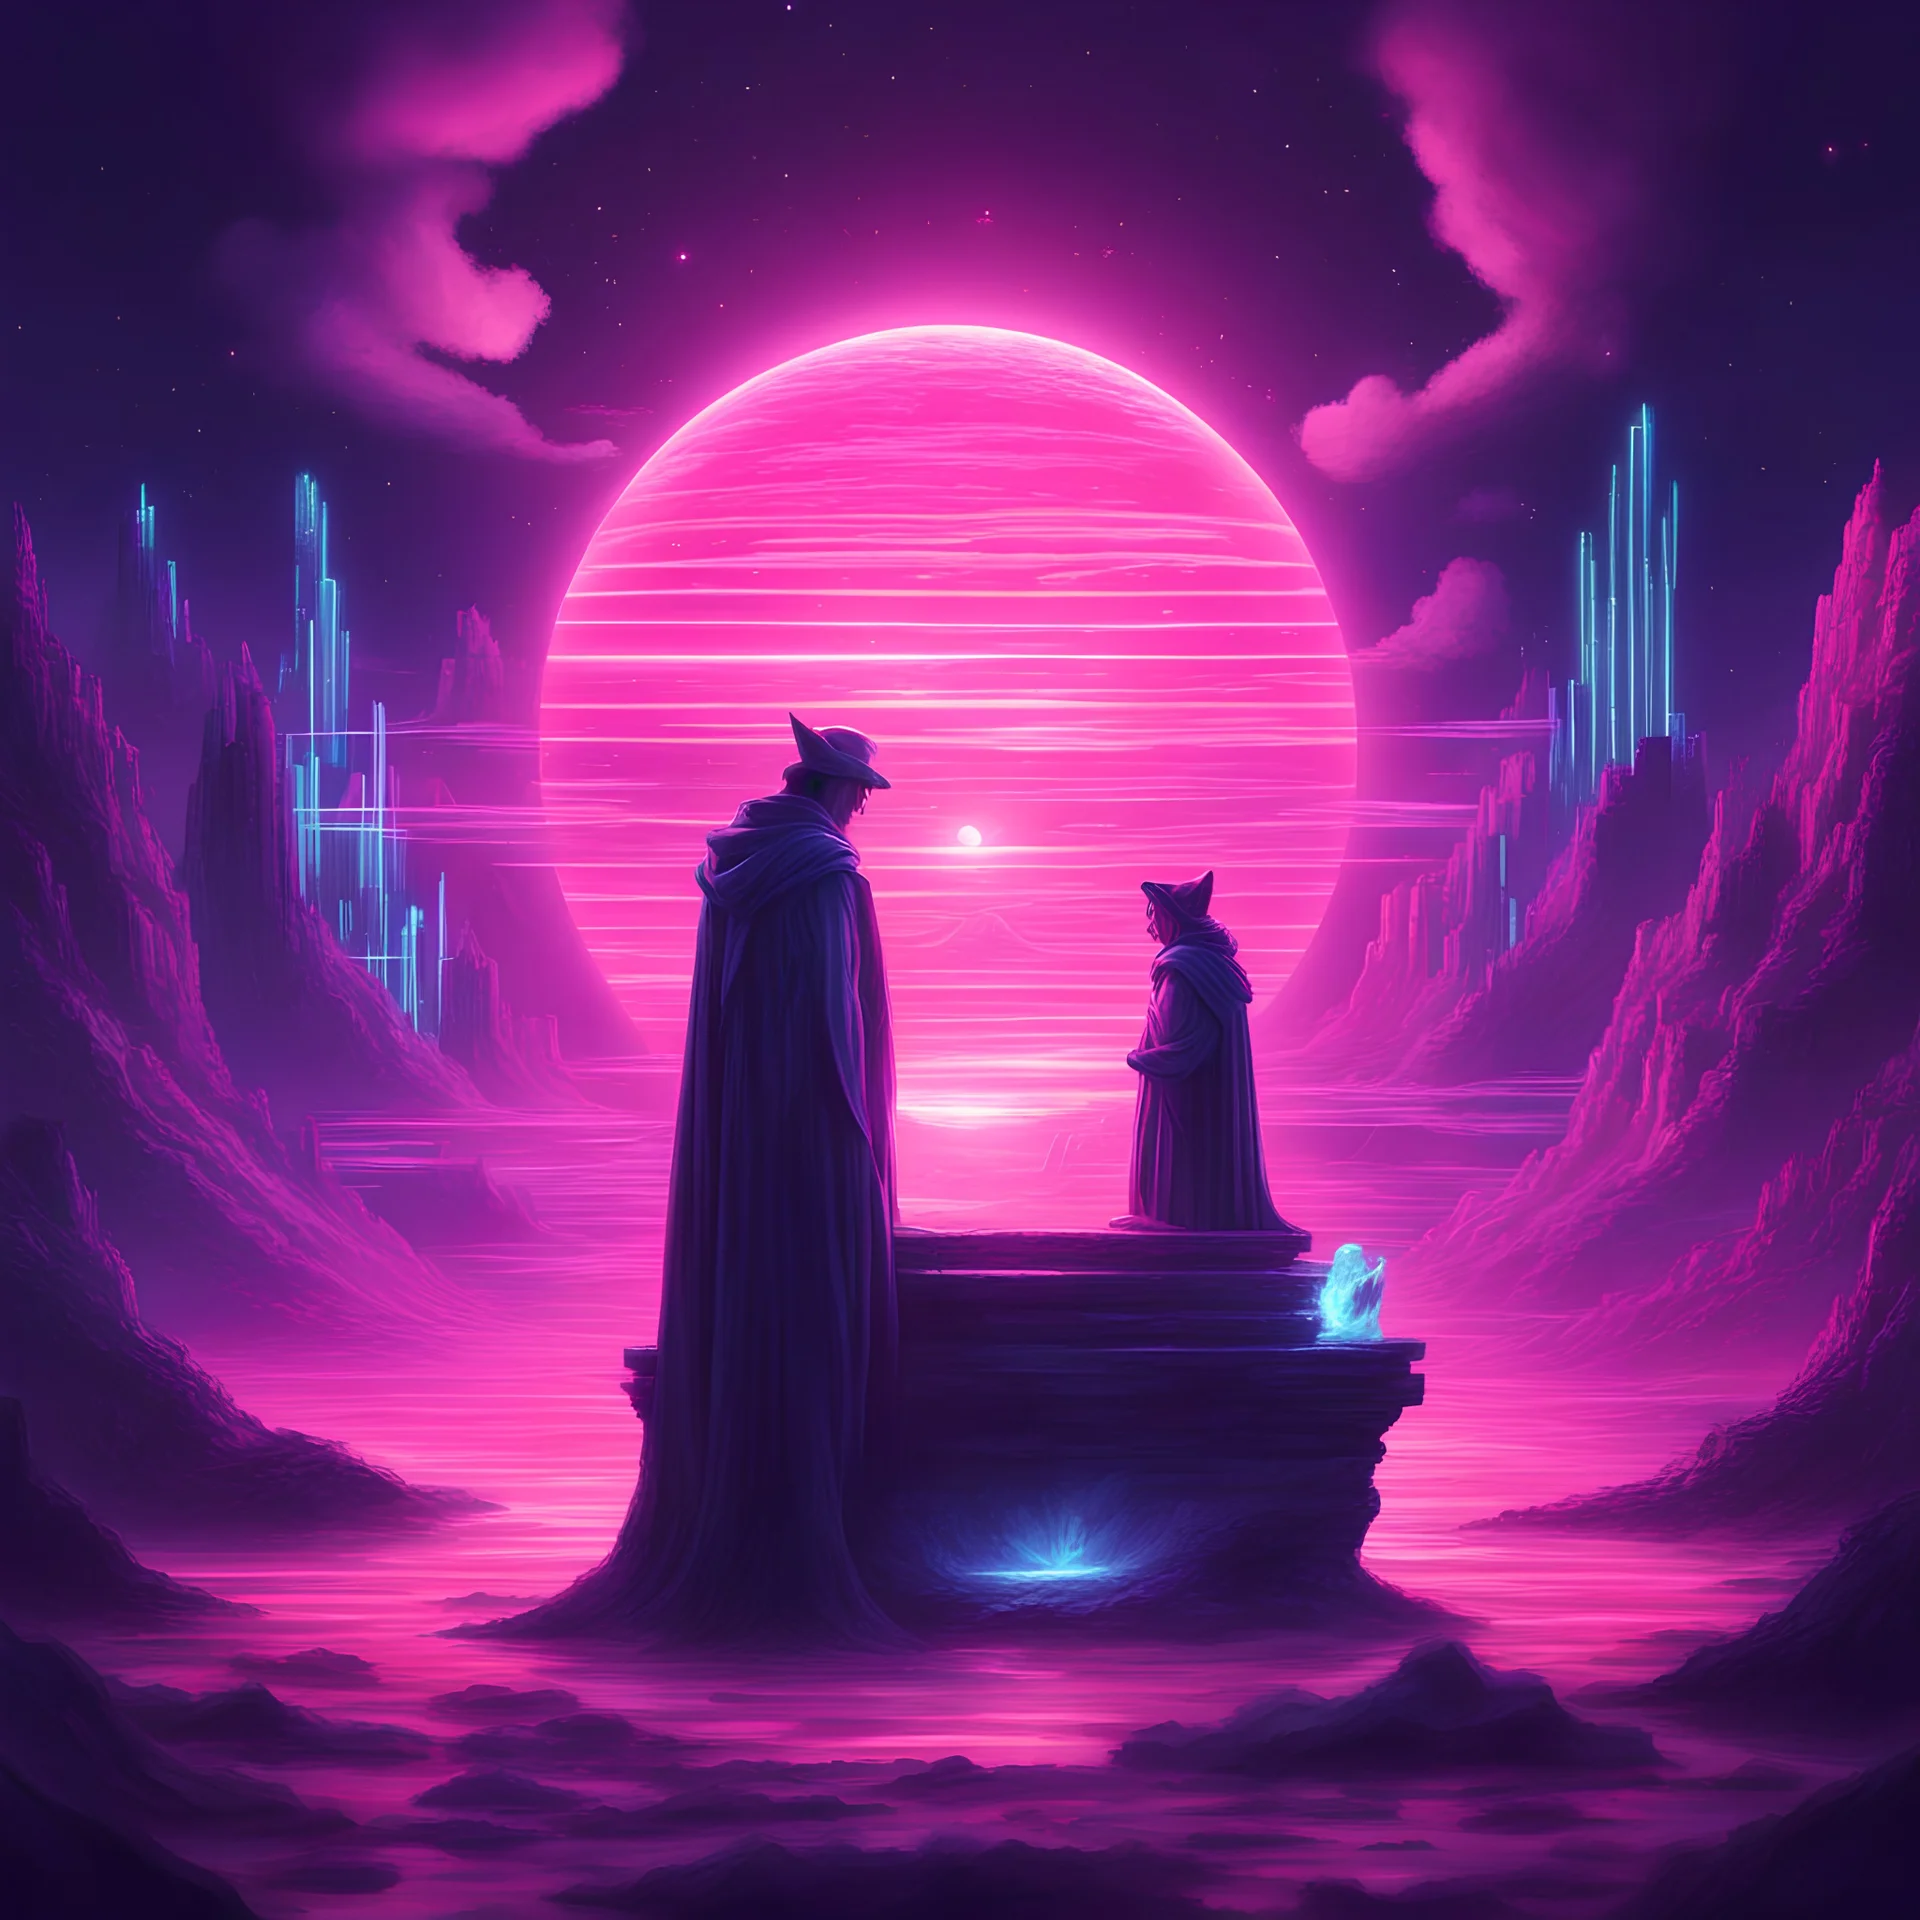 magic words of spell in a world fantasy, synthwave picture style with light pixel,